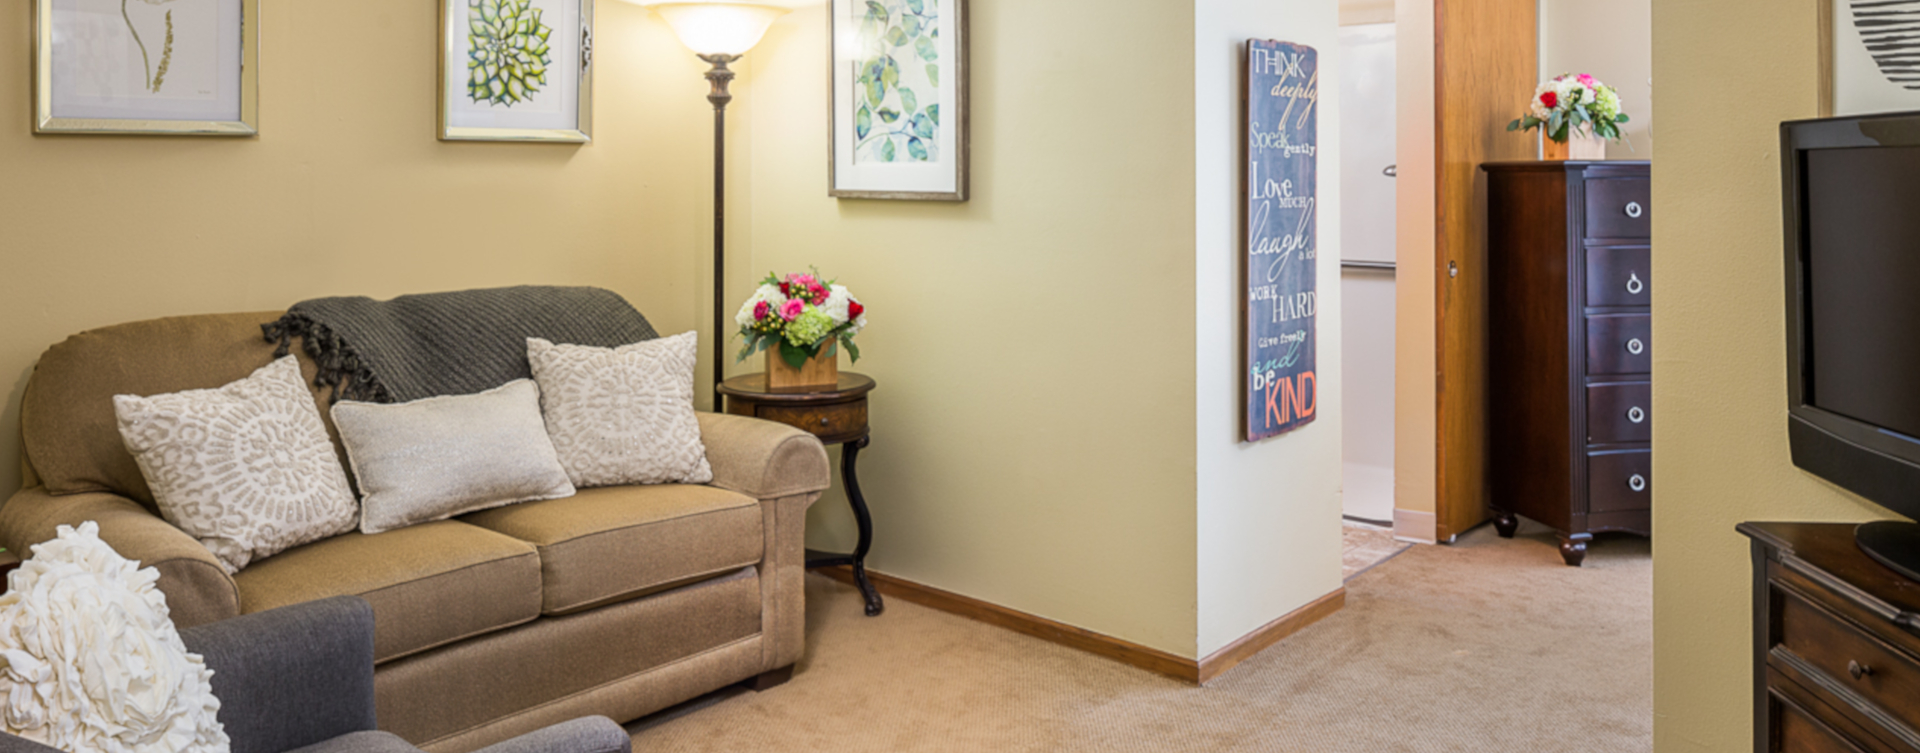 Get a new lease on life with a cozy apartment at Bickford of Urbandale